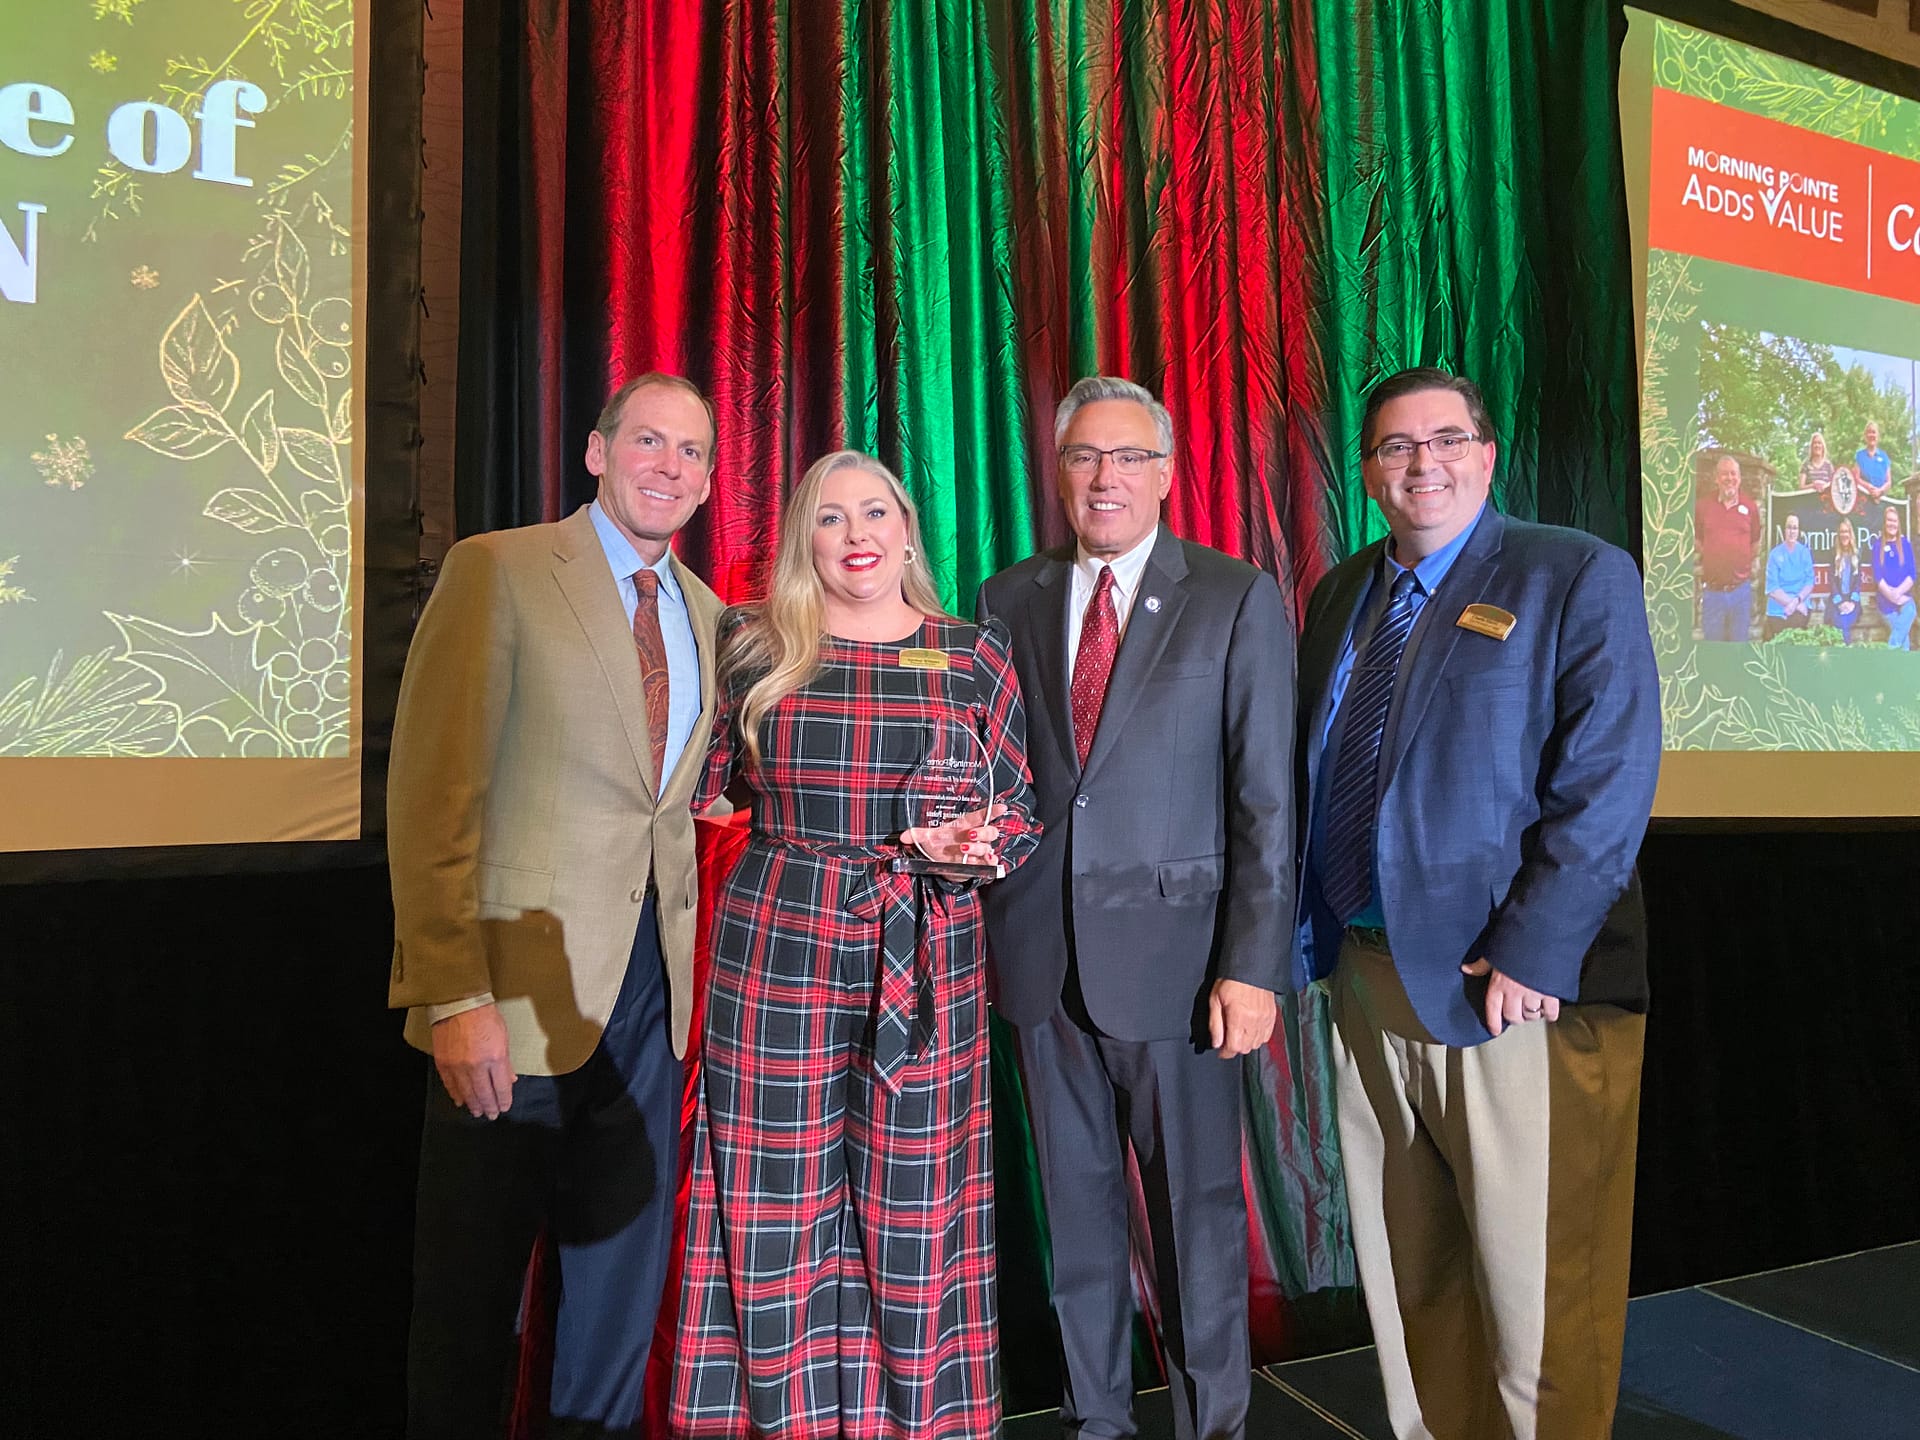 Left to right: Franklin Farrow, Morning Pointe Senior Living Co-Founder and CEO; Lindsay Williams, Executive Director of Morning Pointe of Lenoir City, winner of the Sales and Census Achievement Award; Greg A. Vital, Morning Pointe Senior Living Co-Founder and President; and Charlie Harris, Morning Pointe's VP of Sales and Marketing